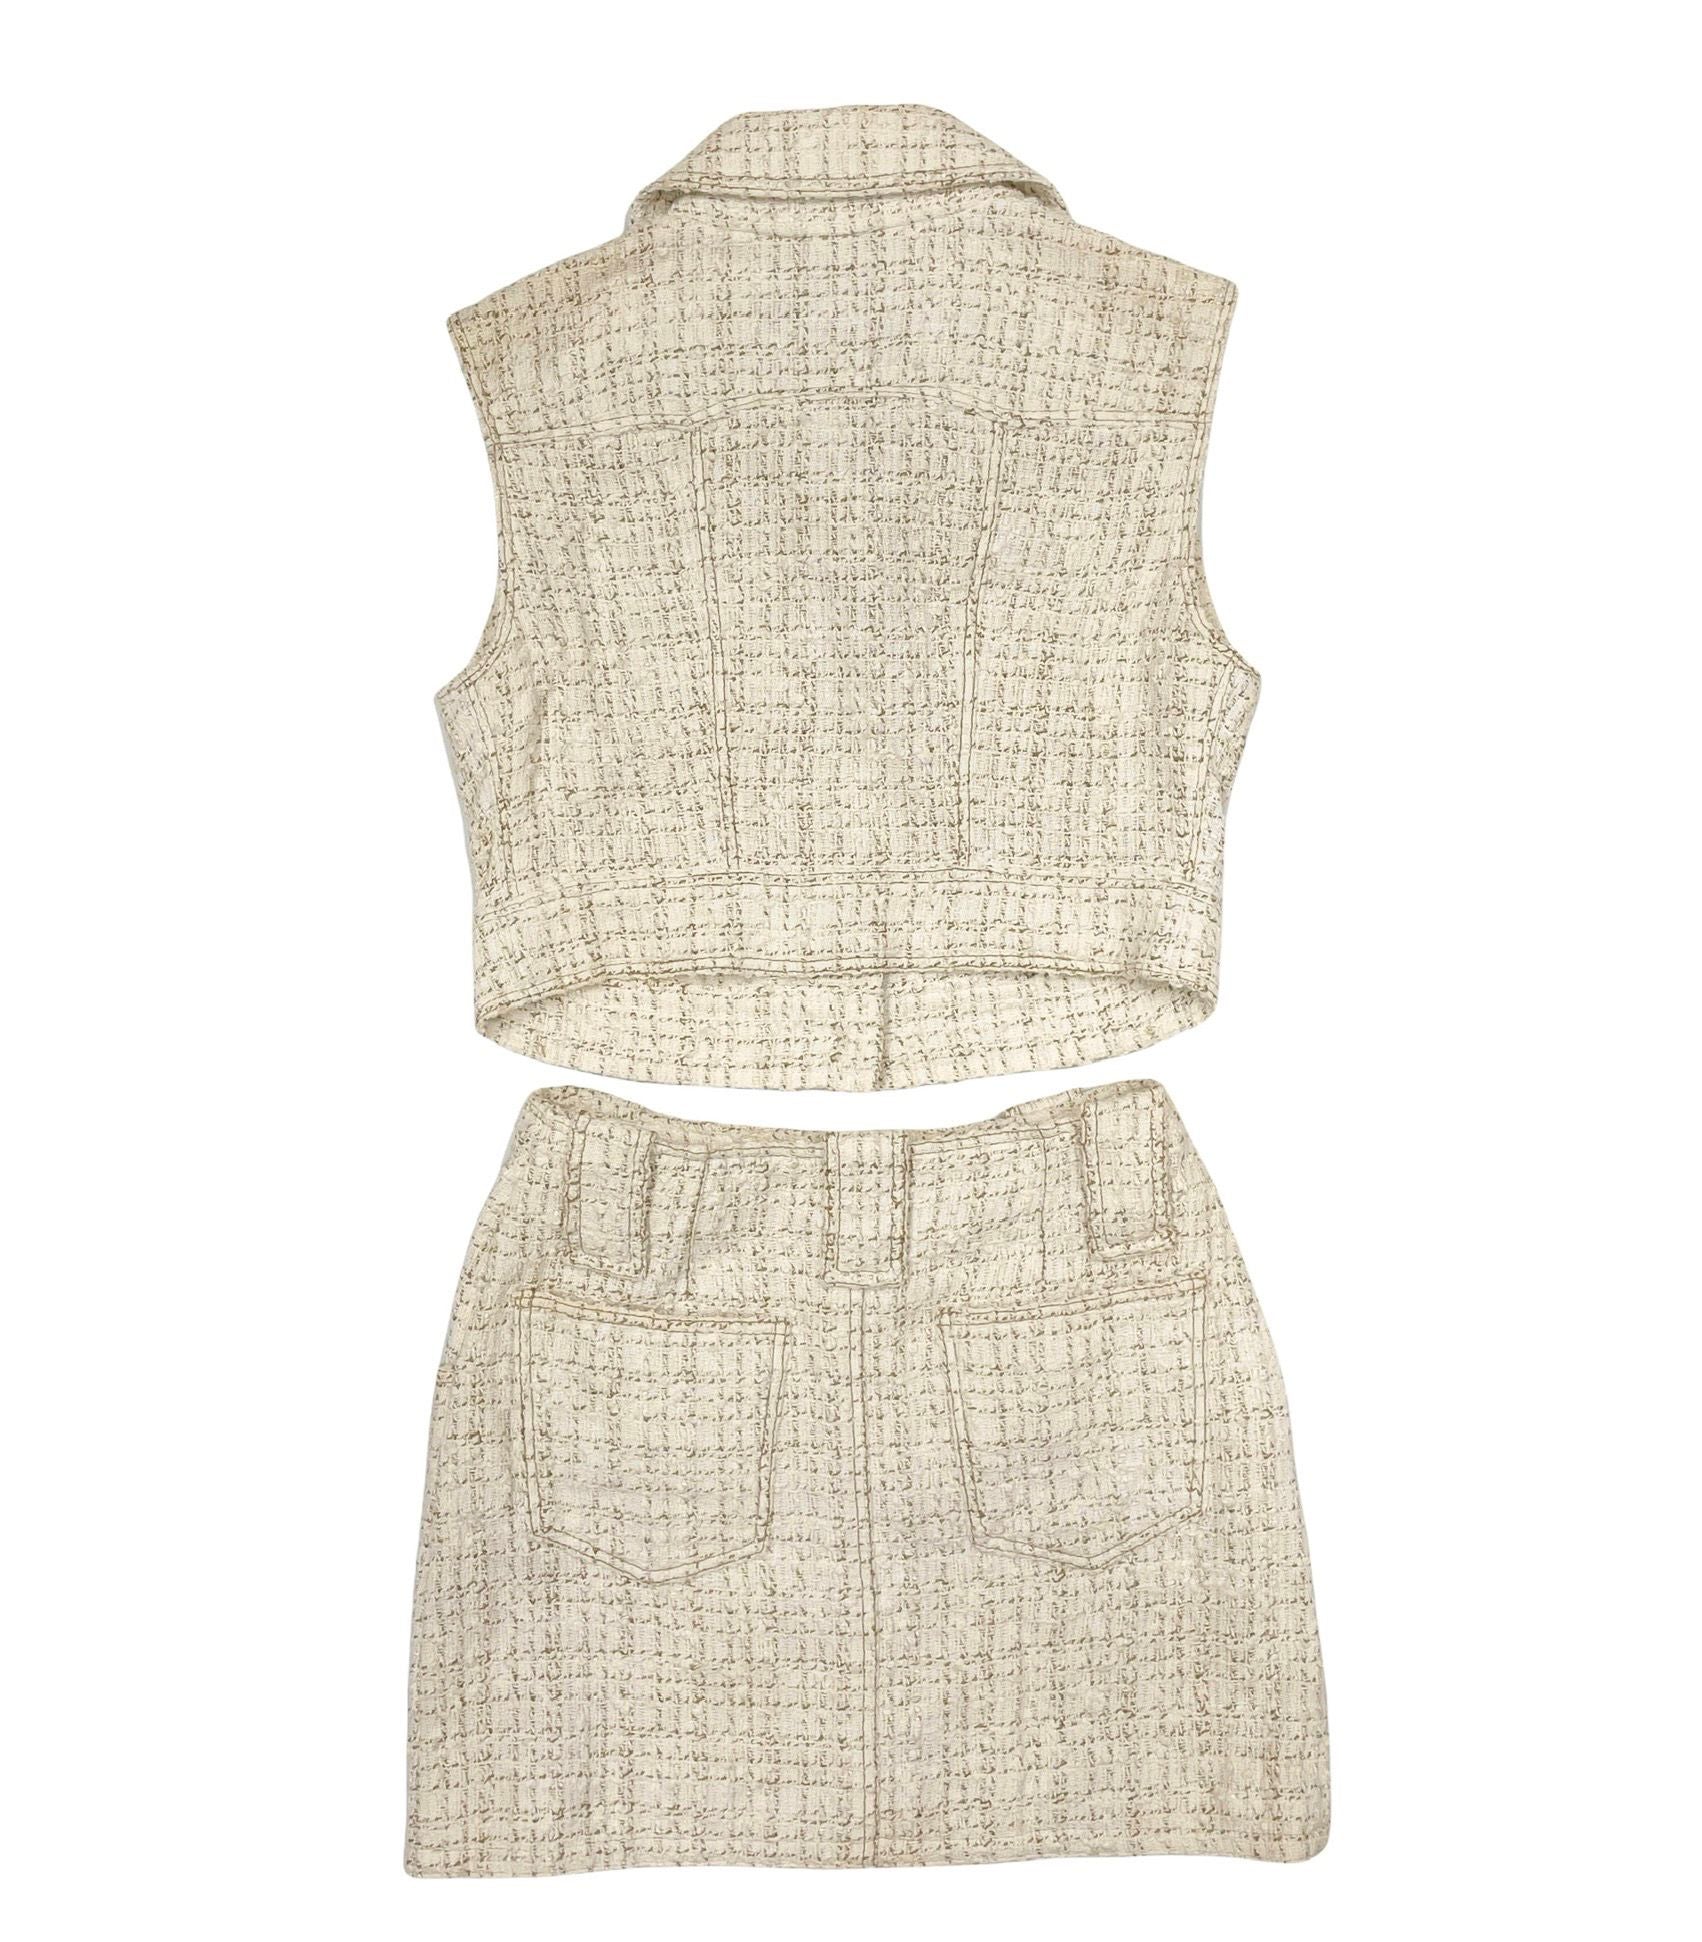 Chanel Ivory Tweed Boucle Skirt Suit with Maroon Trim  Decades Inc